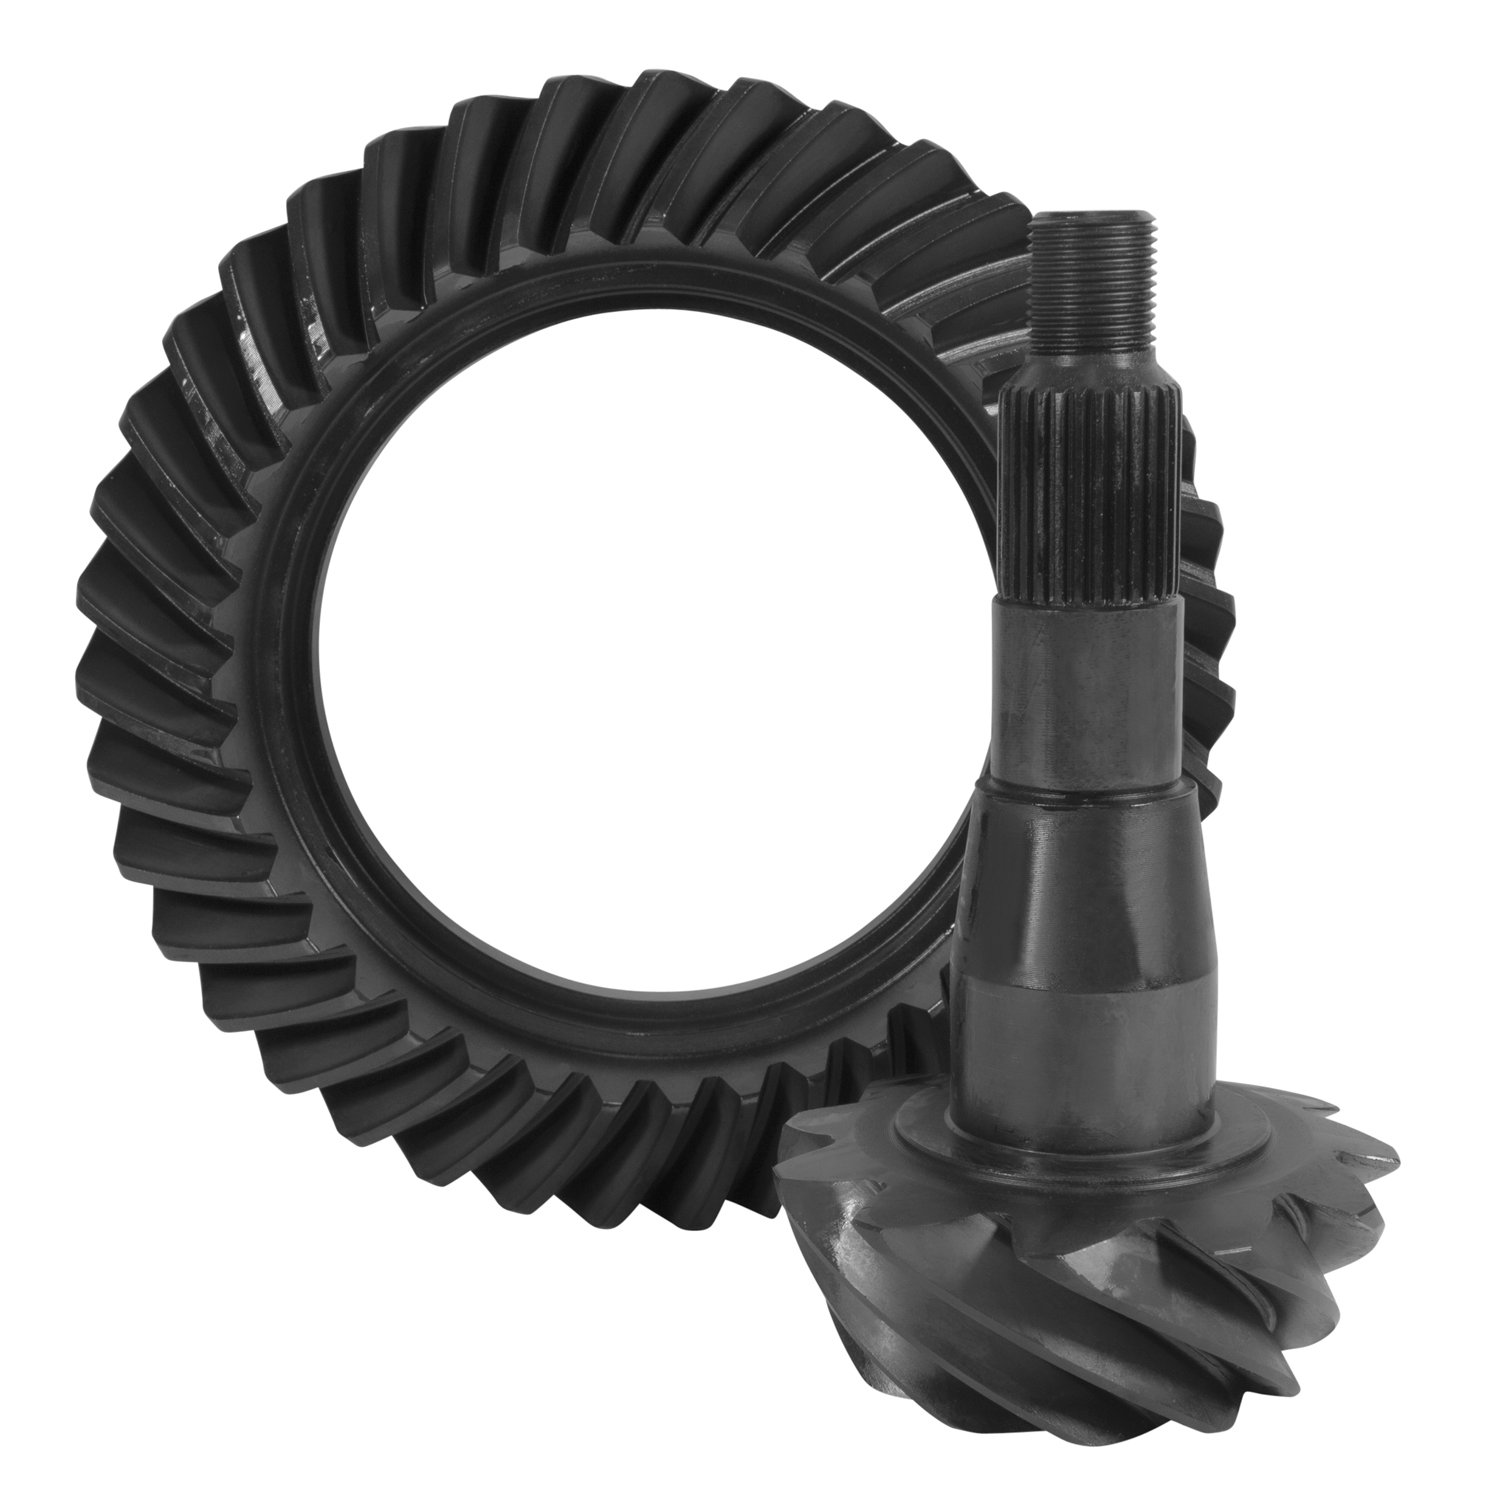 USA Standard ZG C9.25-411 Ring & Pinion Gear Set, For '10 & Down Chrysler 9.25 in., 4.11 Ratio